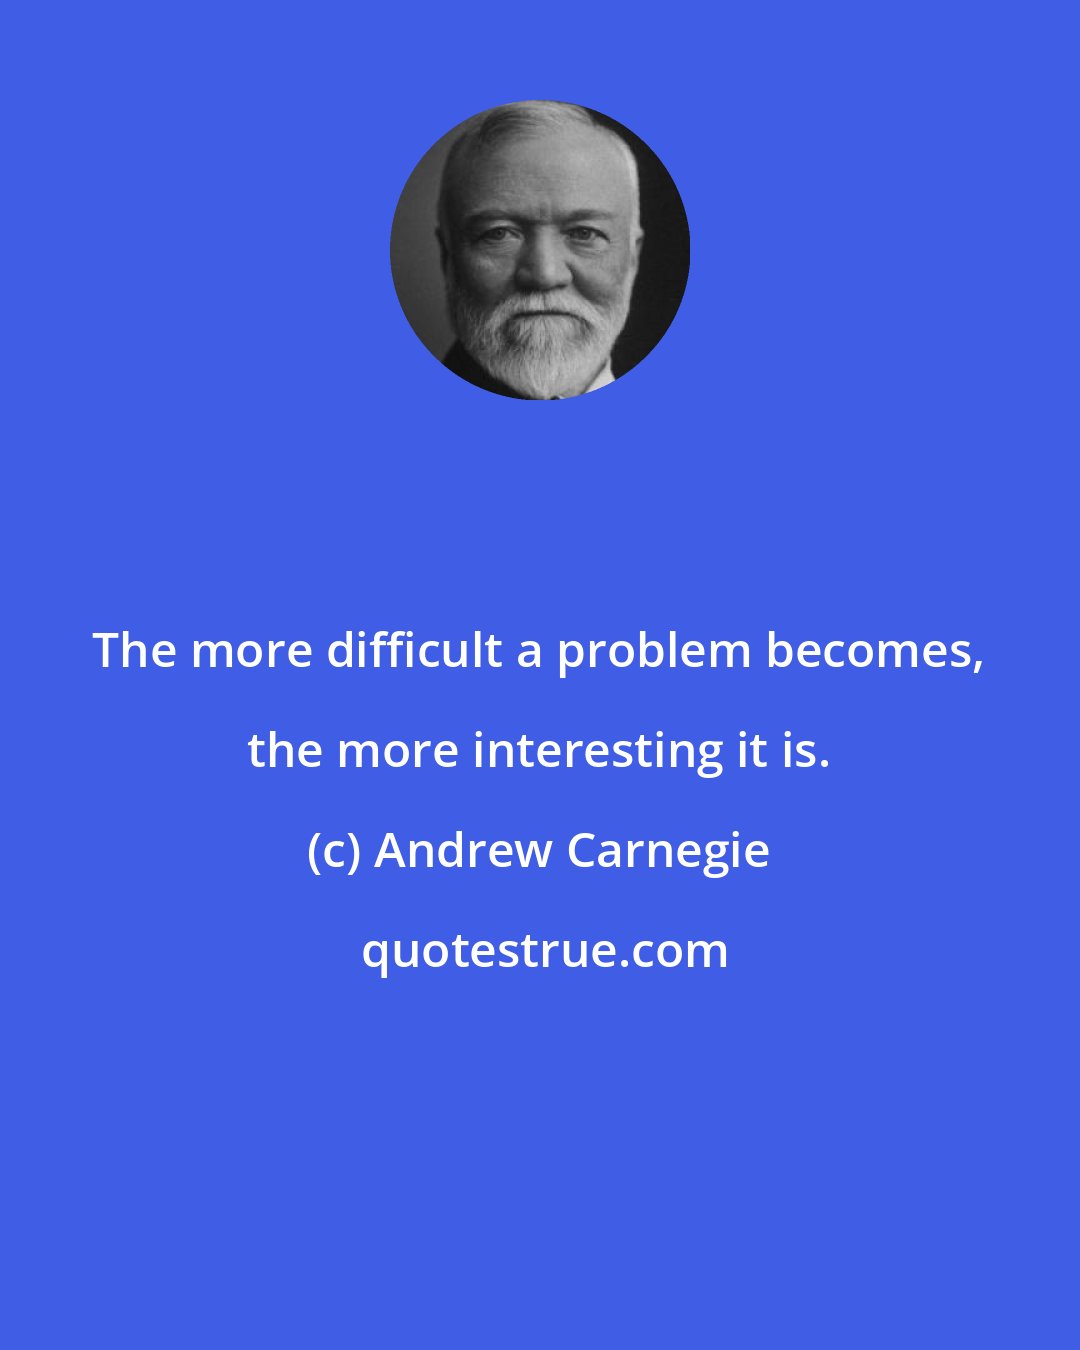 Andrew Carnegie: The more difficult a problem becomes, the more interesting it is.